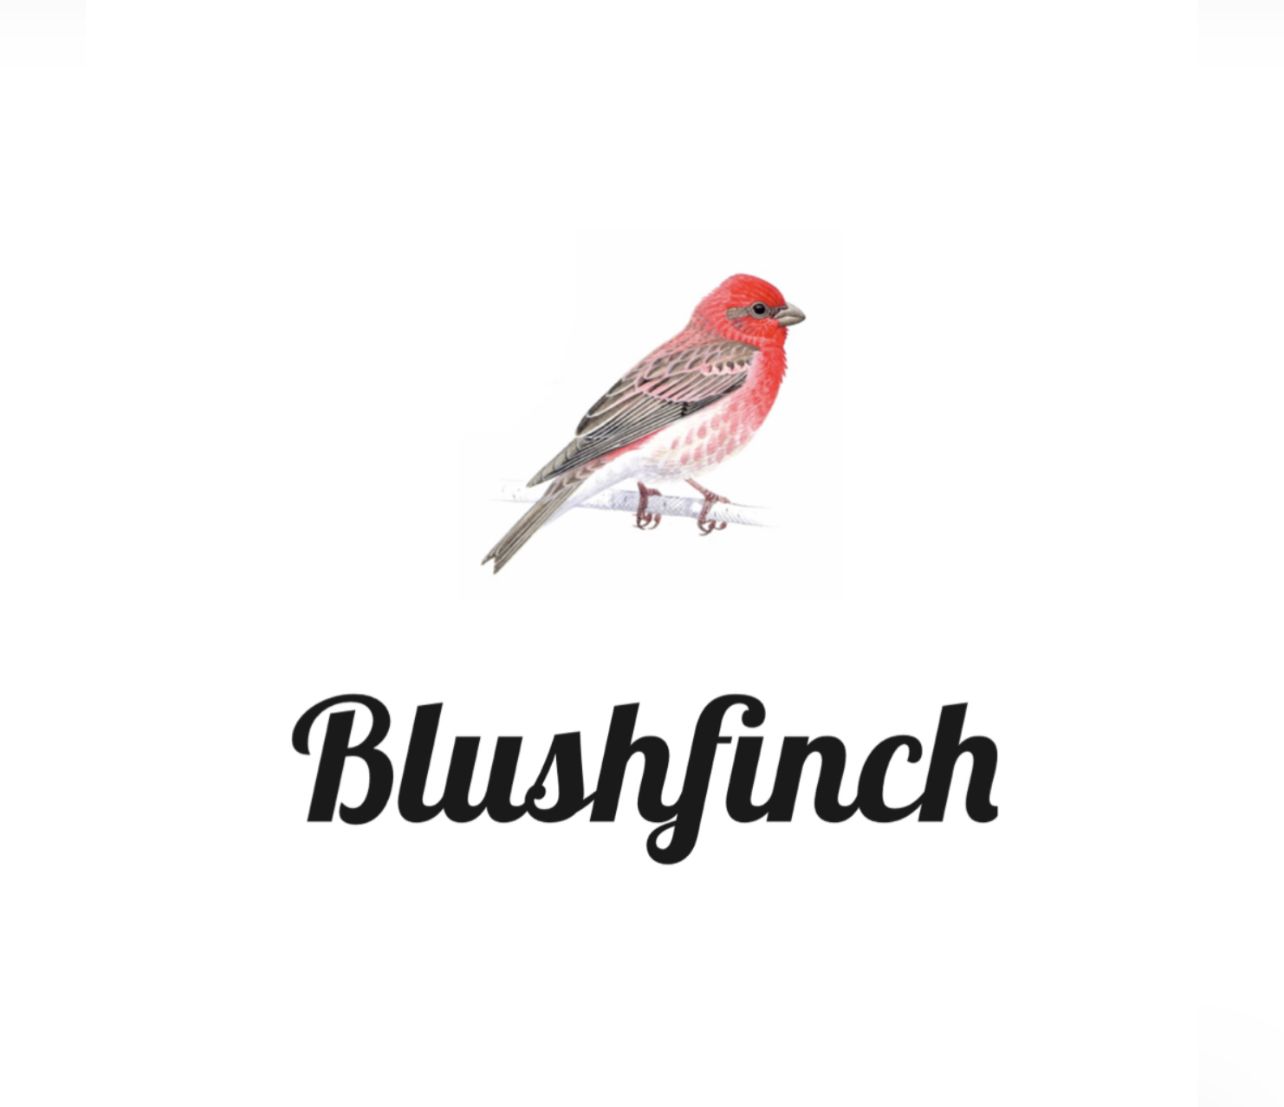 This shop is called Blushfinch 